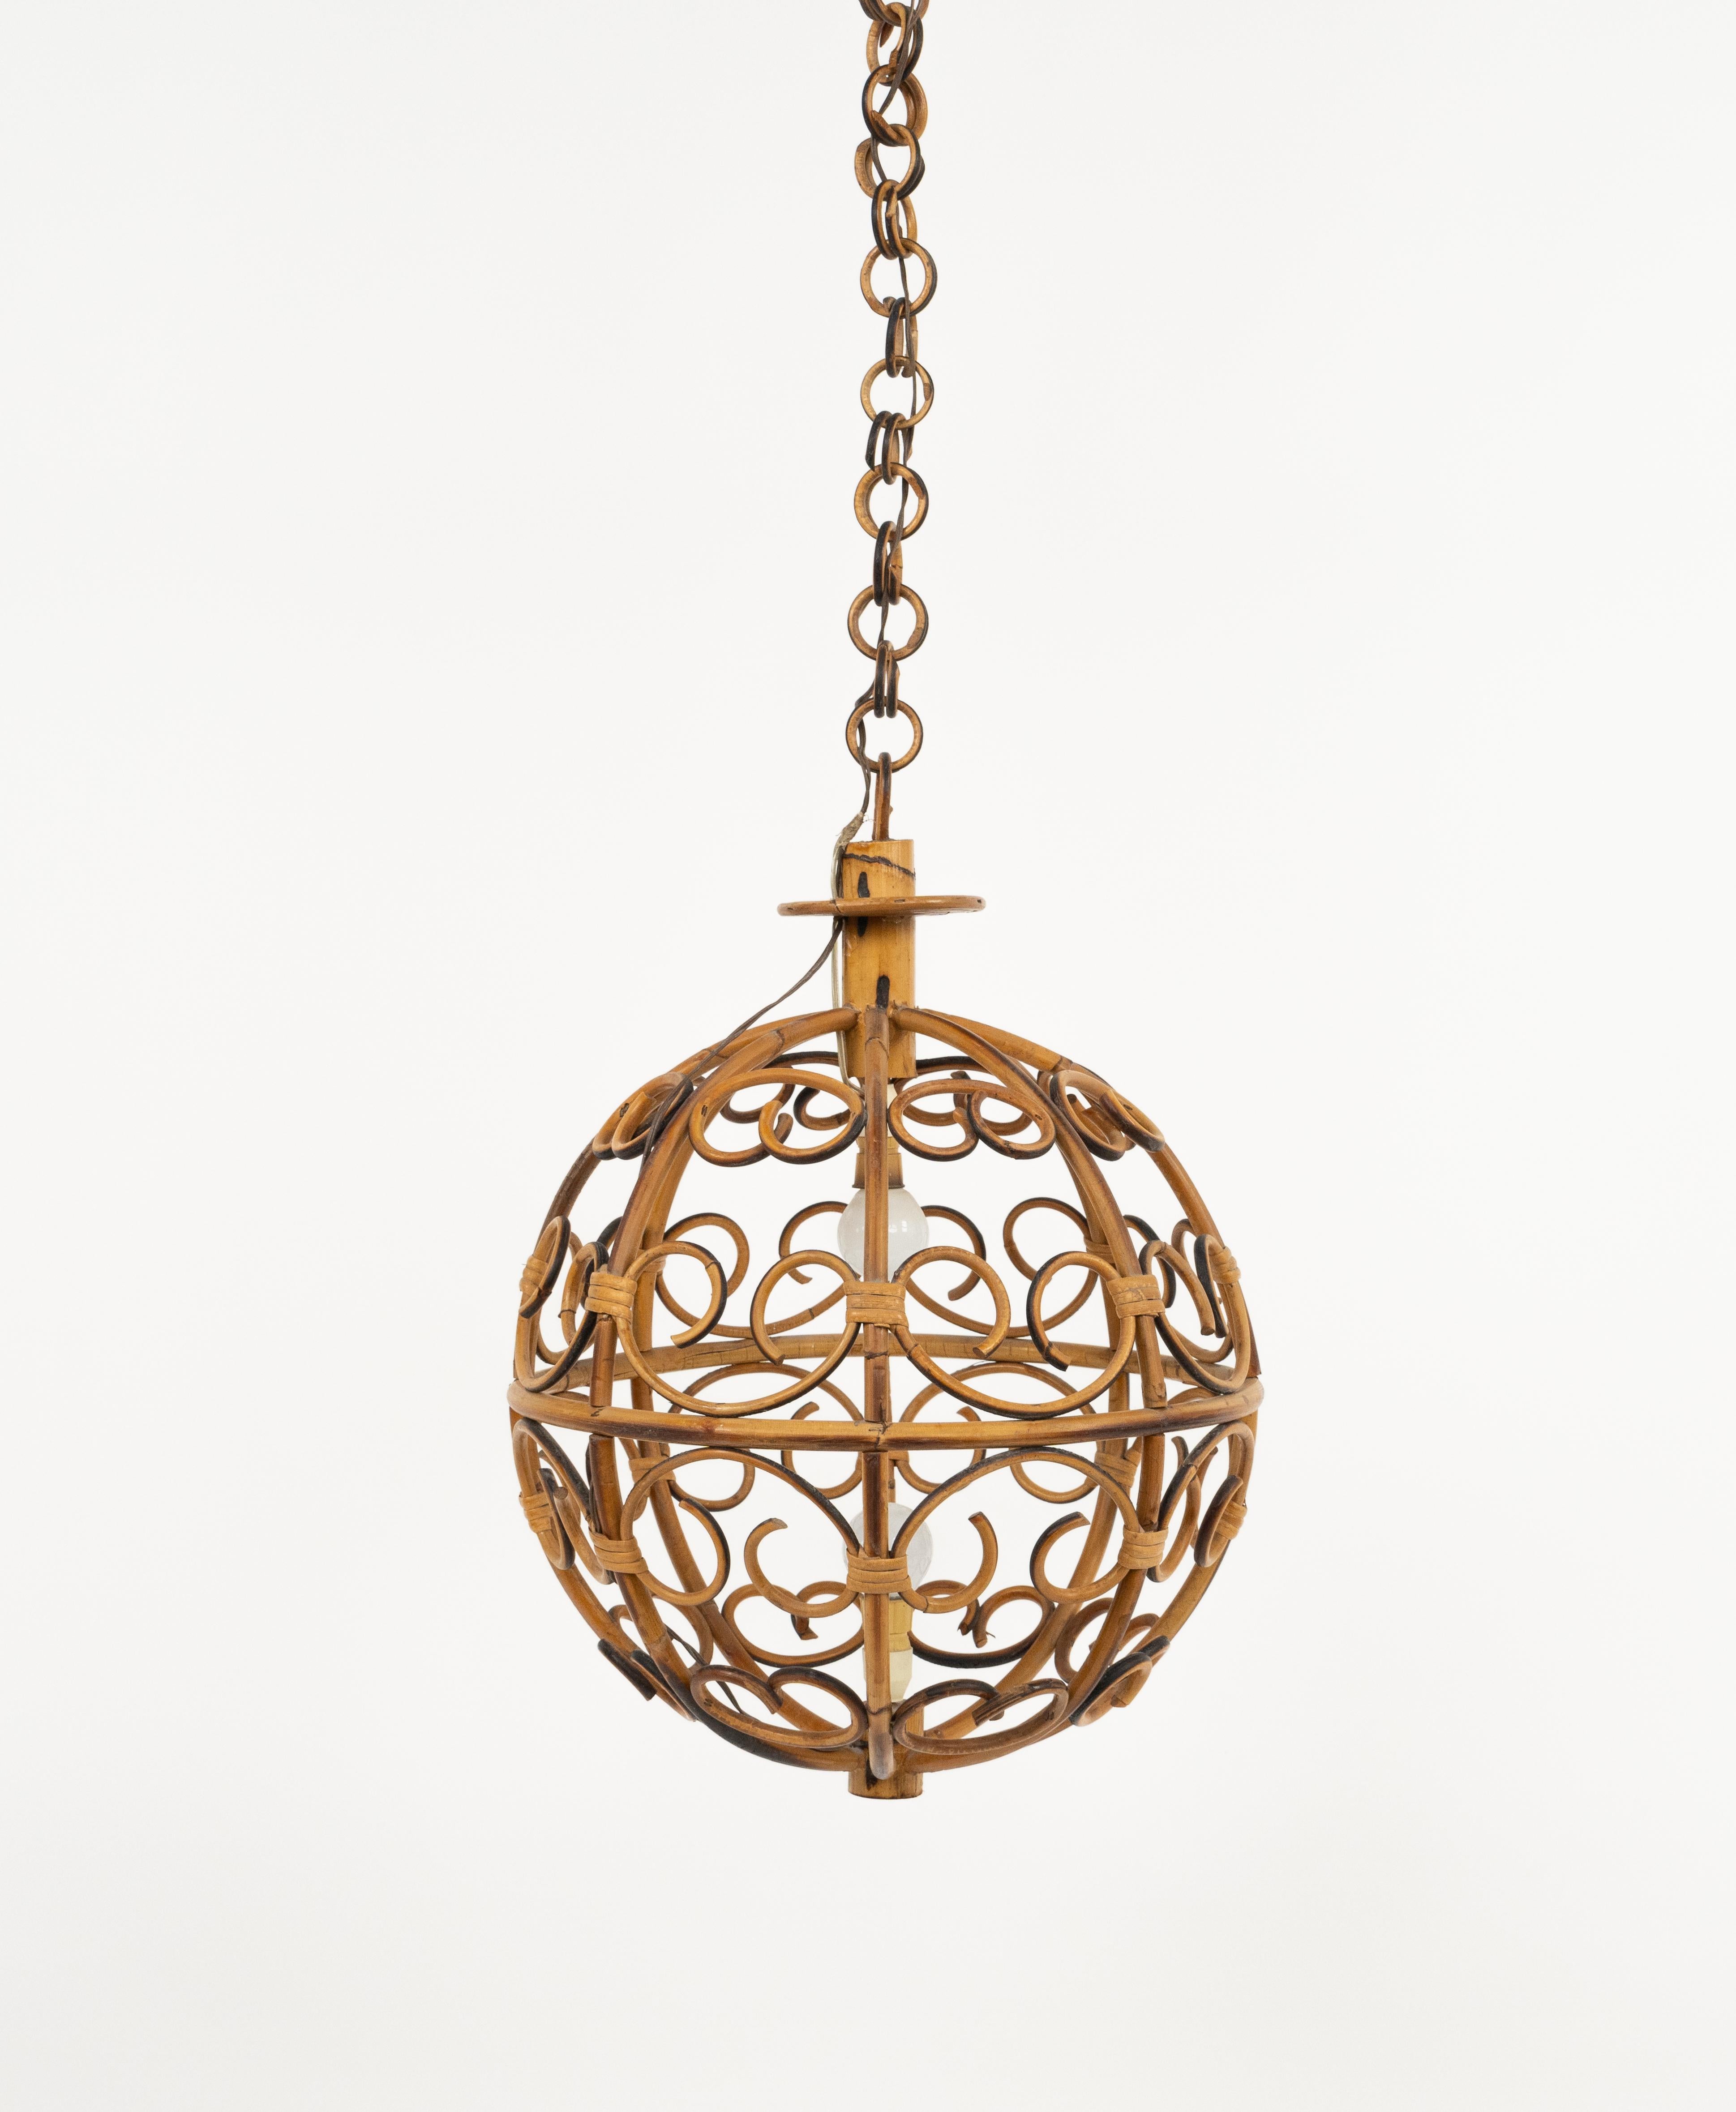 Mid-20th Century Midcentury Globe Chandelier in Rattan and Bamboo, Italy 1960s For Sale